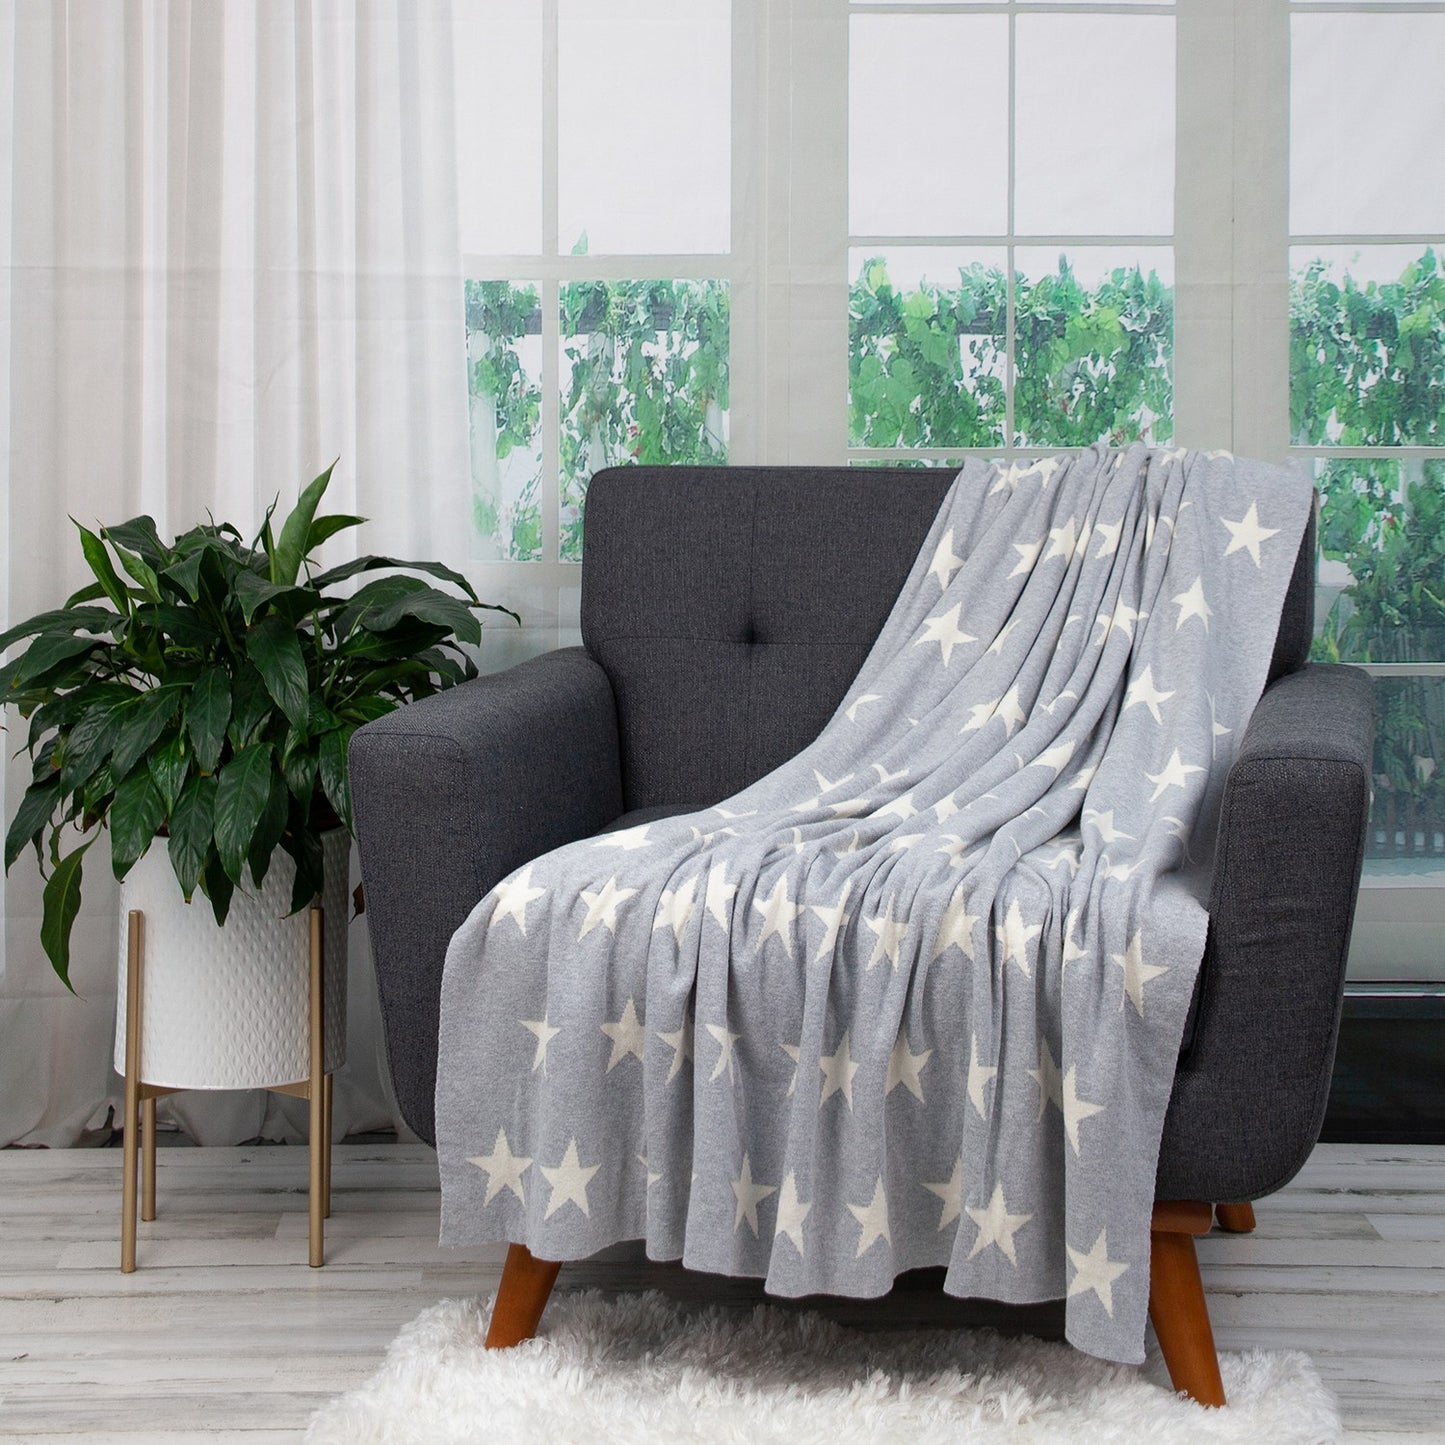 Gray and White Stars Knitted Throw Blanket-4